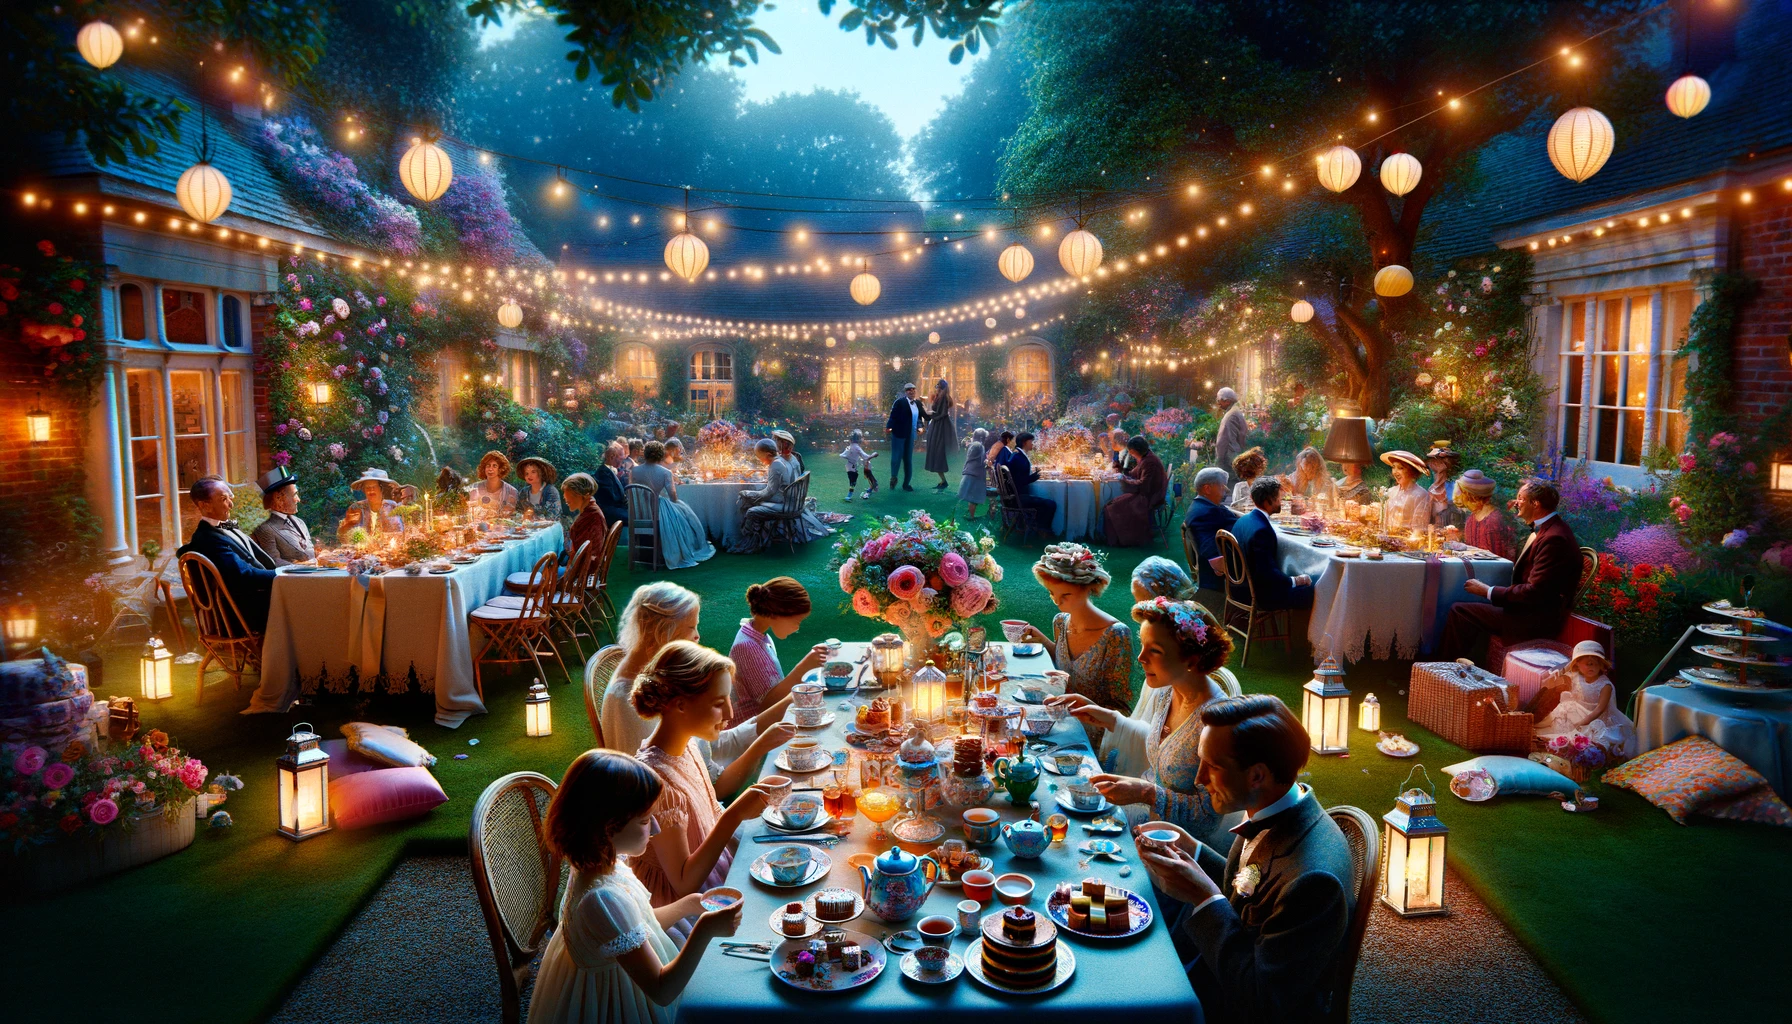 A view of a festive tea party set in a lush garden adorned with fairy lights and lanterns, creating a magical atmosphere